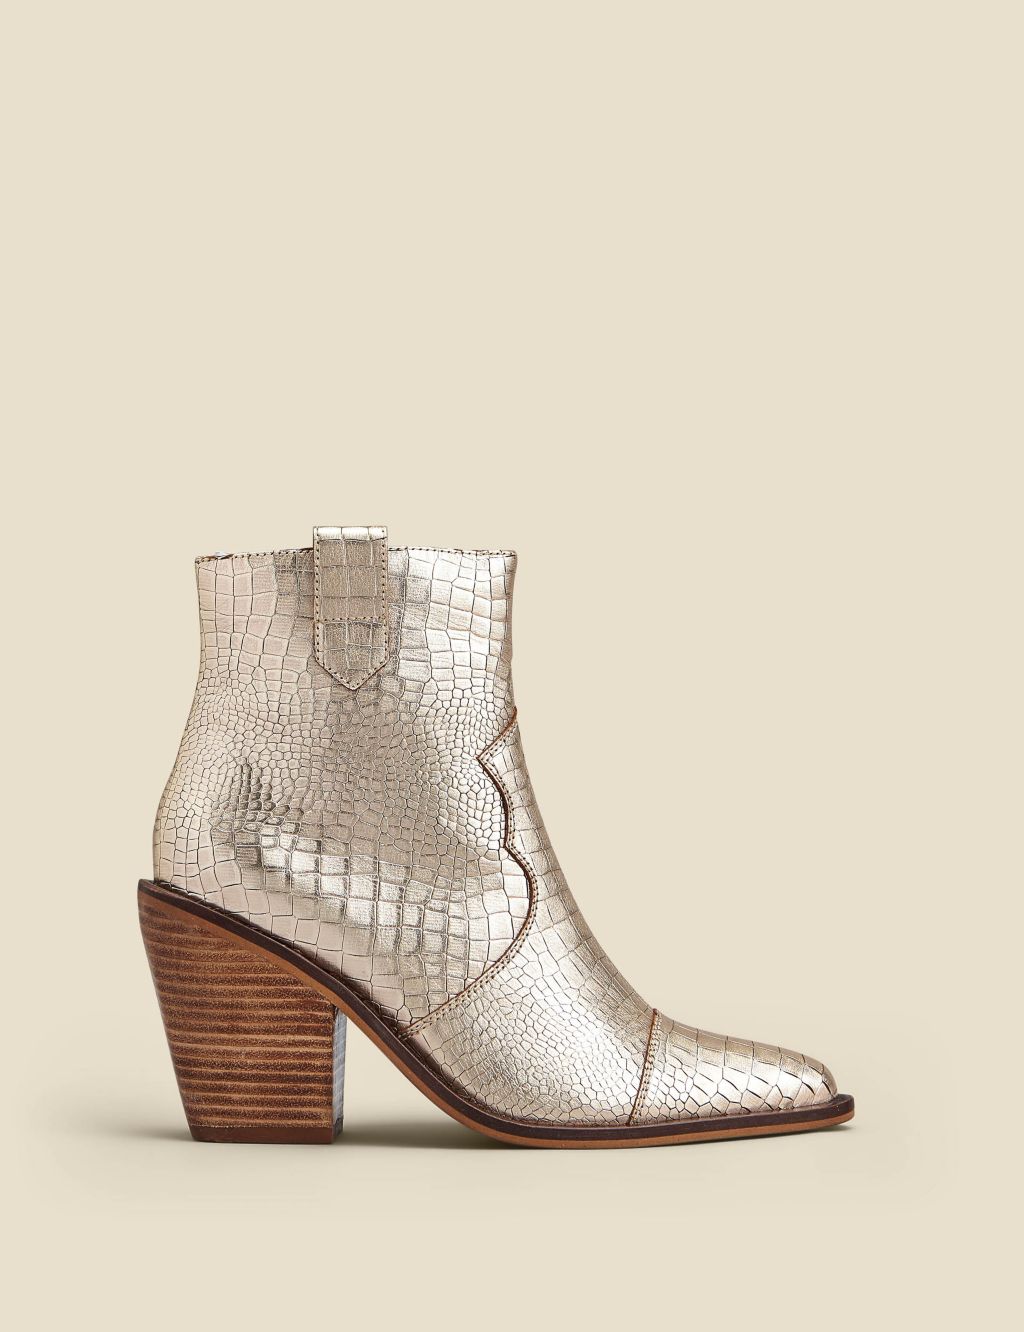 Leather Cow Boy Croc Block Heel Ankle Boots